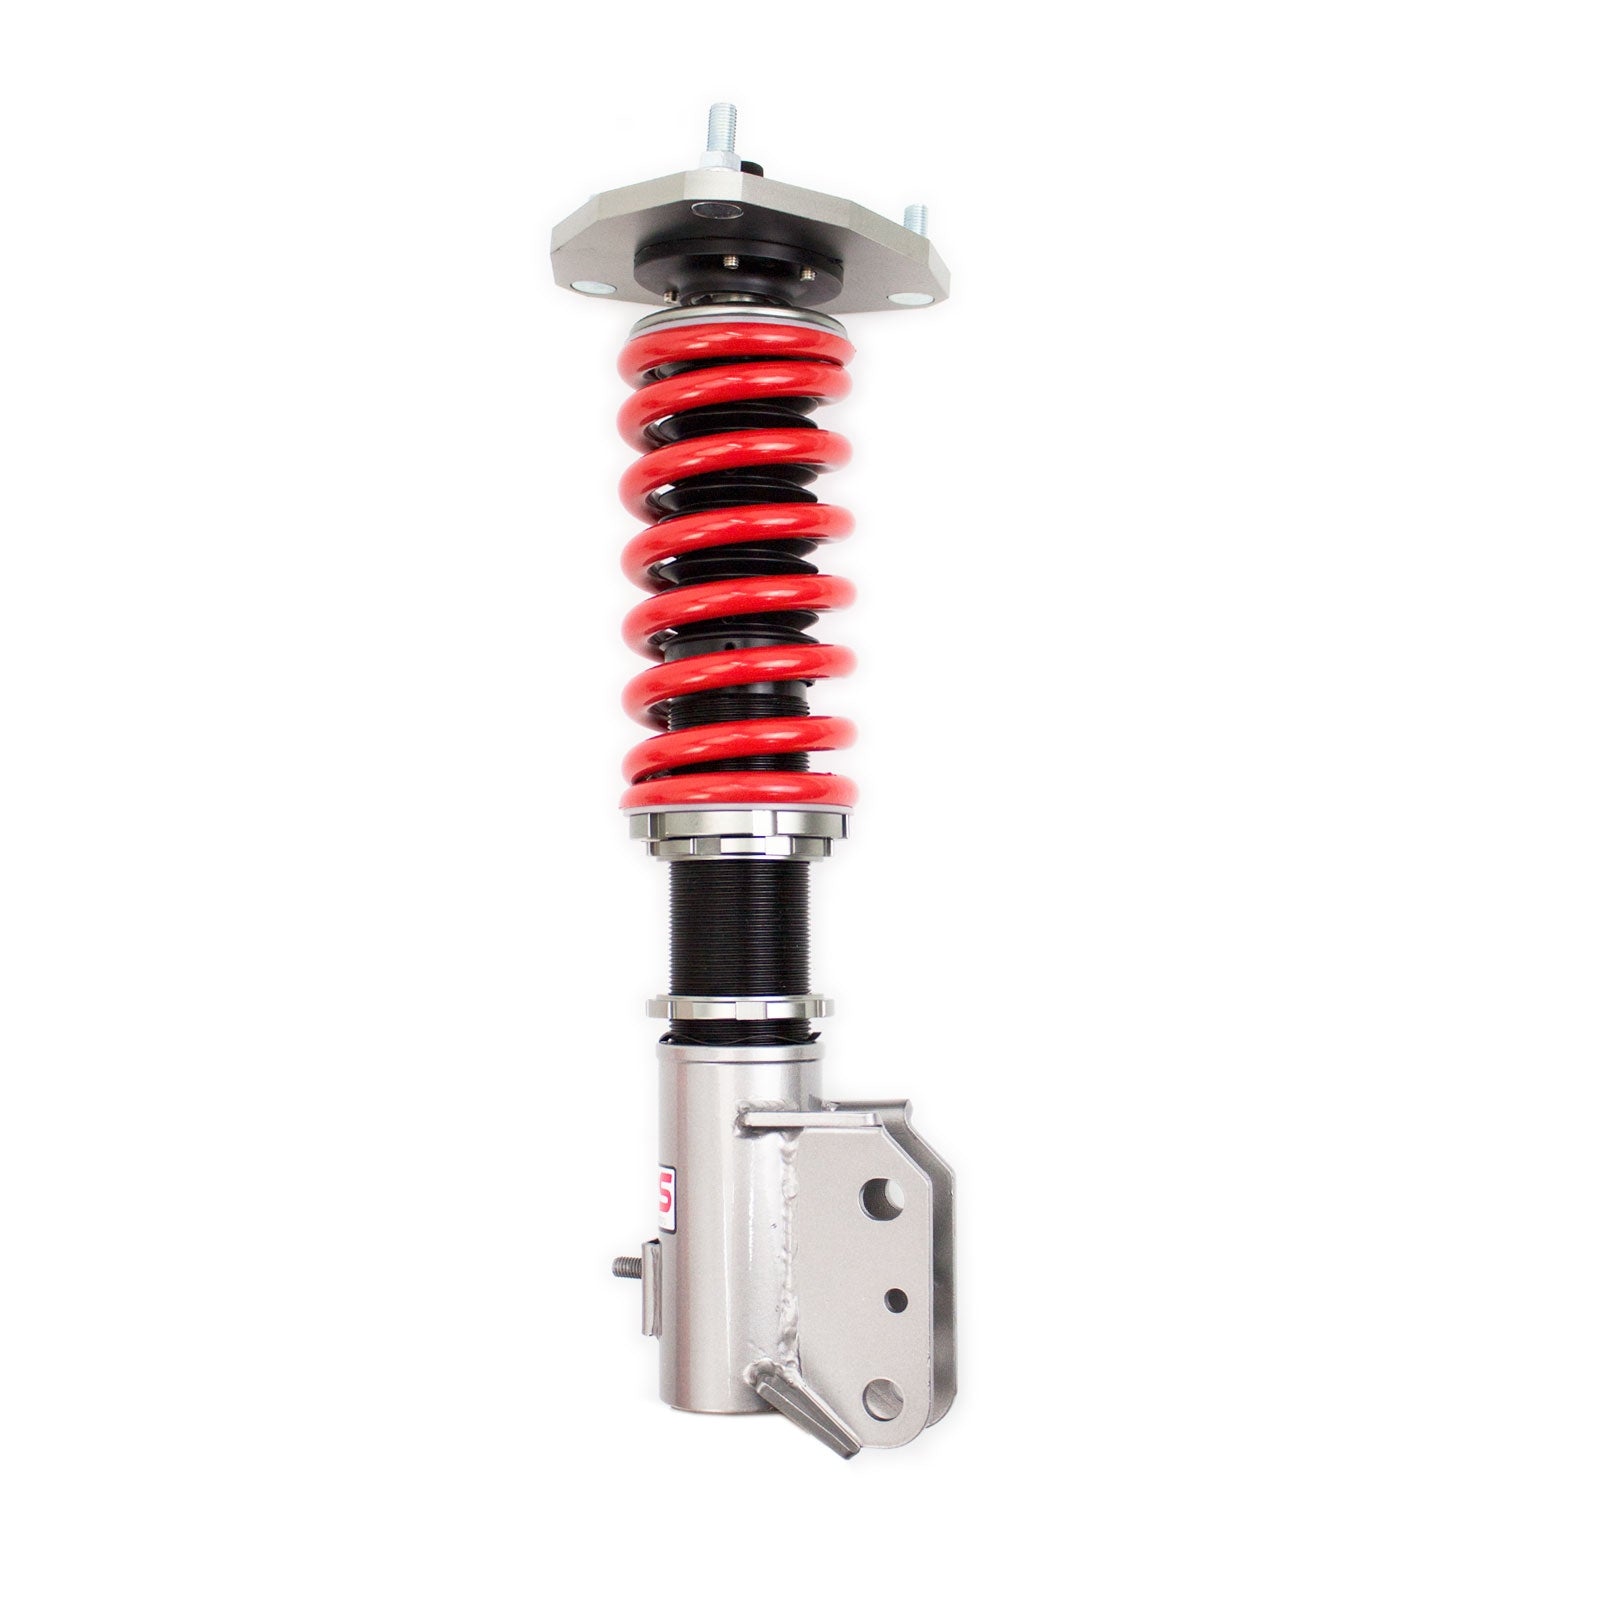 Godspeed MRS1570 MonoRS Coilover Lowering Kit, 32 Damping Adjustment, Ride Height Adjustable